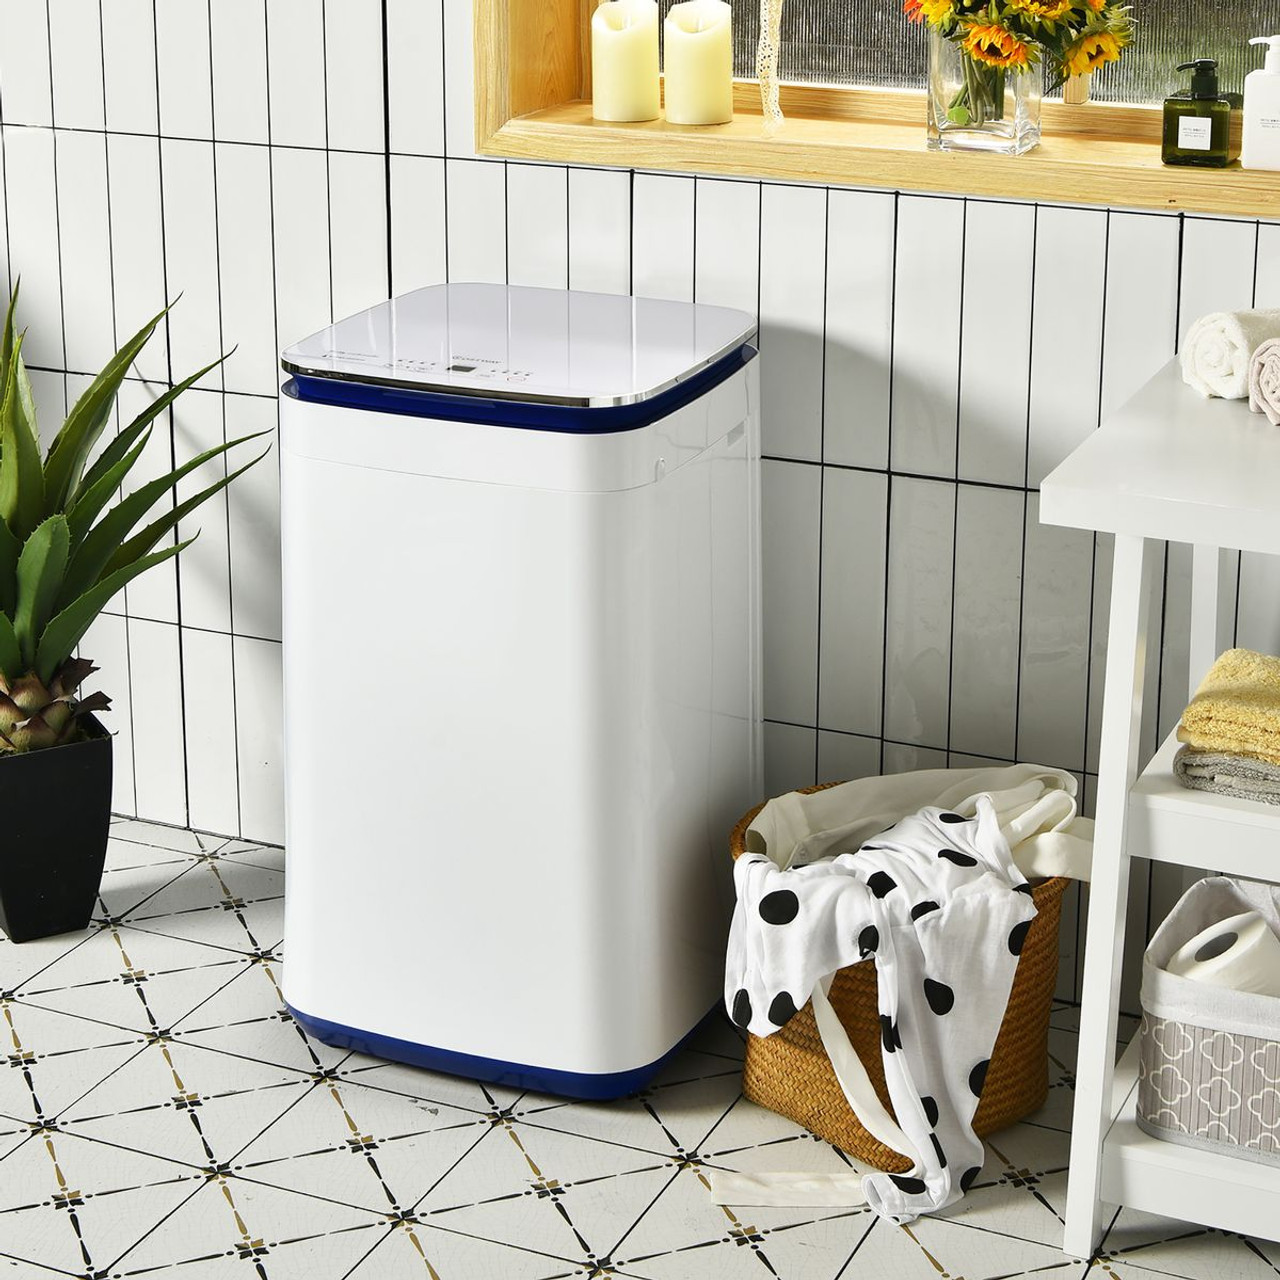 7.7-Pound Compact Fully Automatic Washing Machine with Heating Function product image